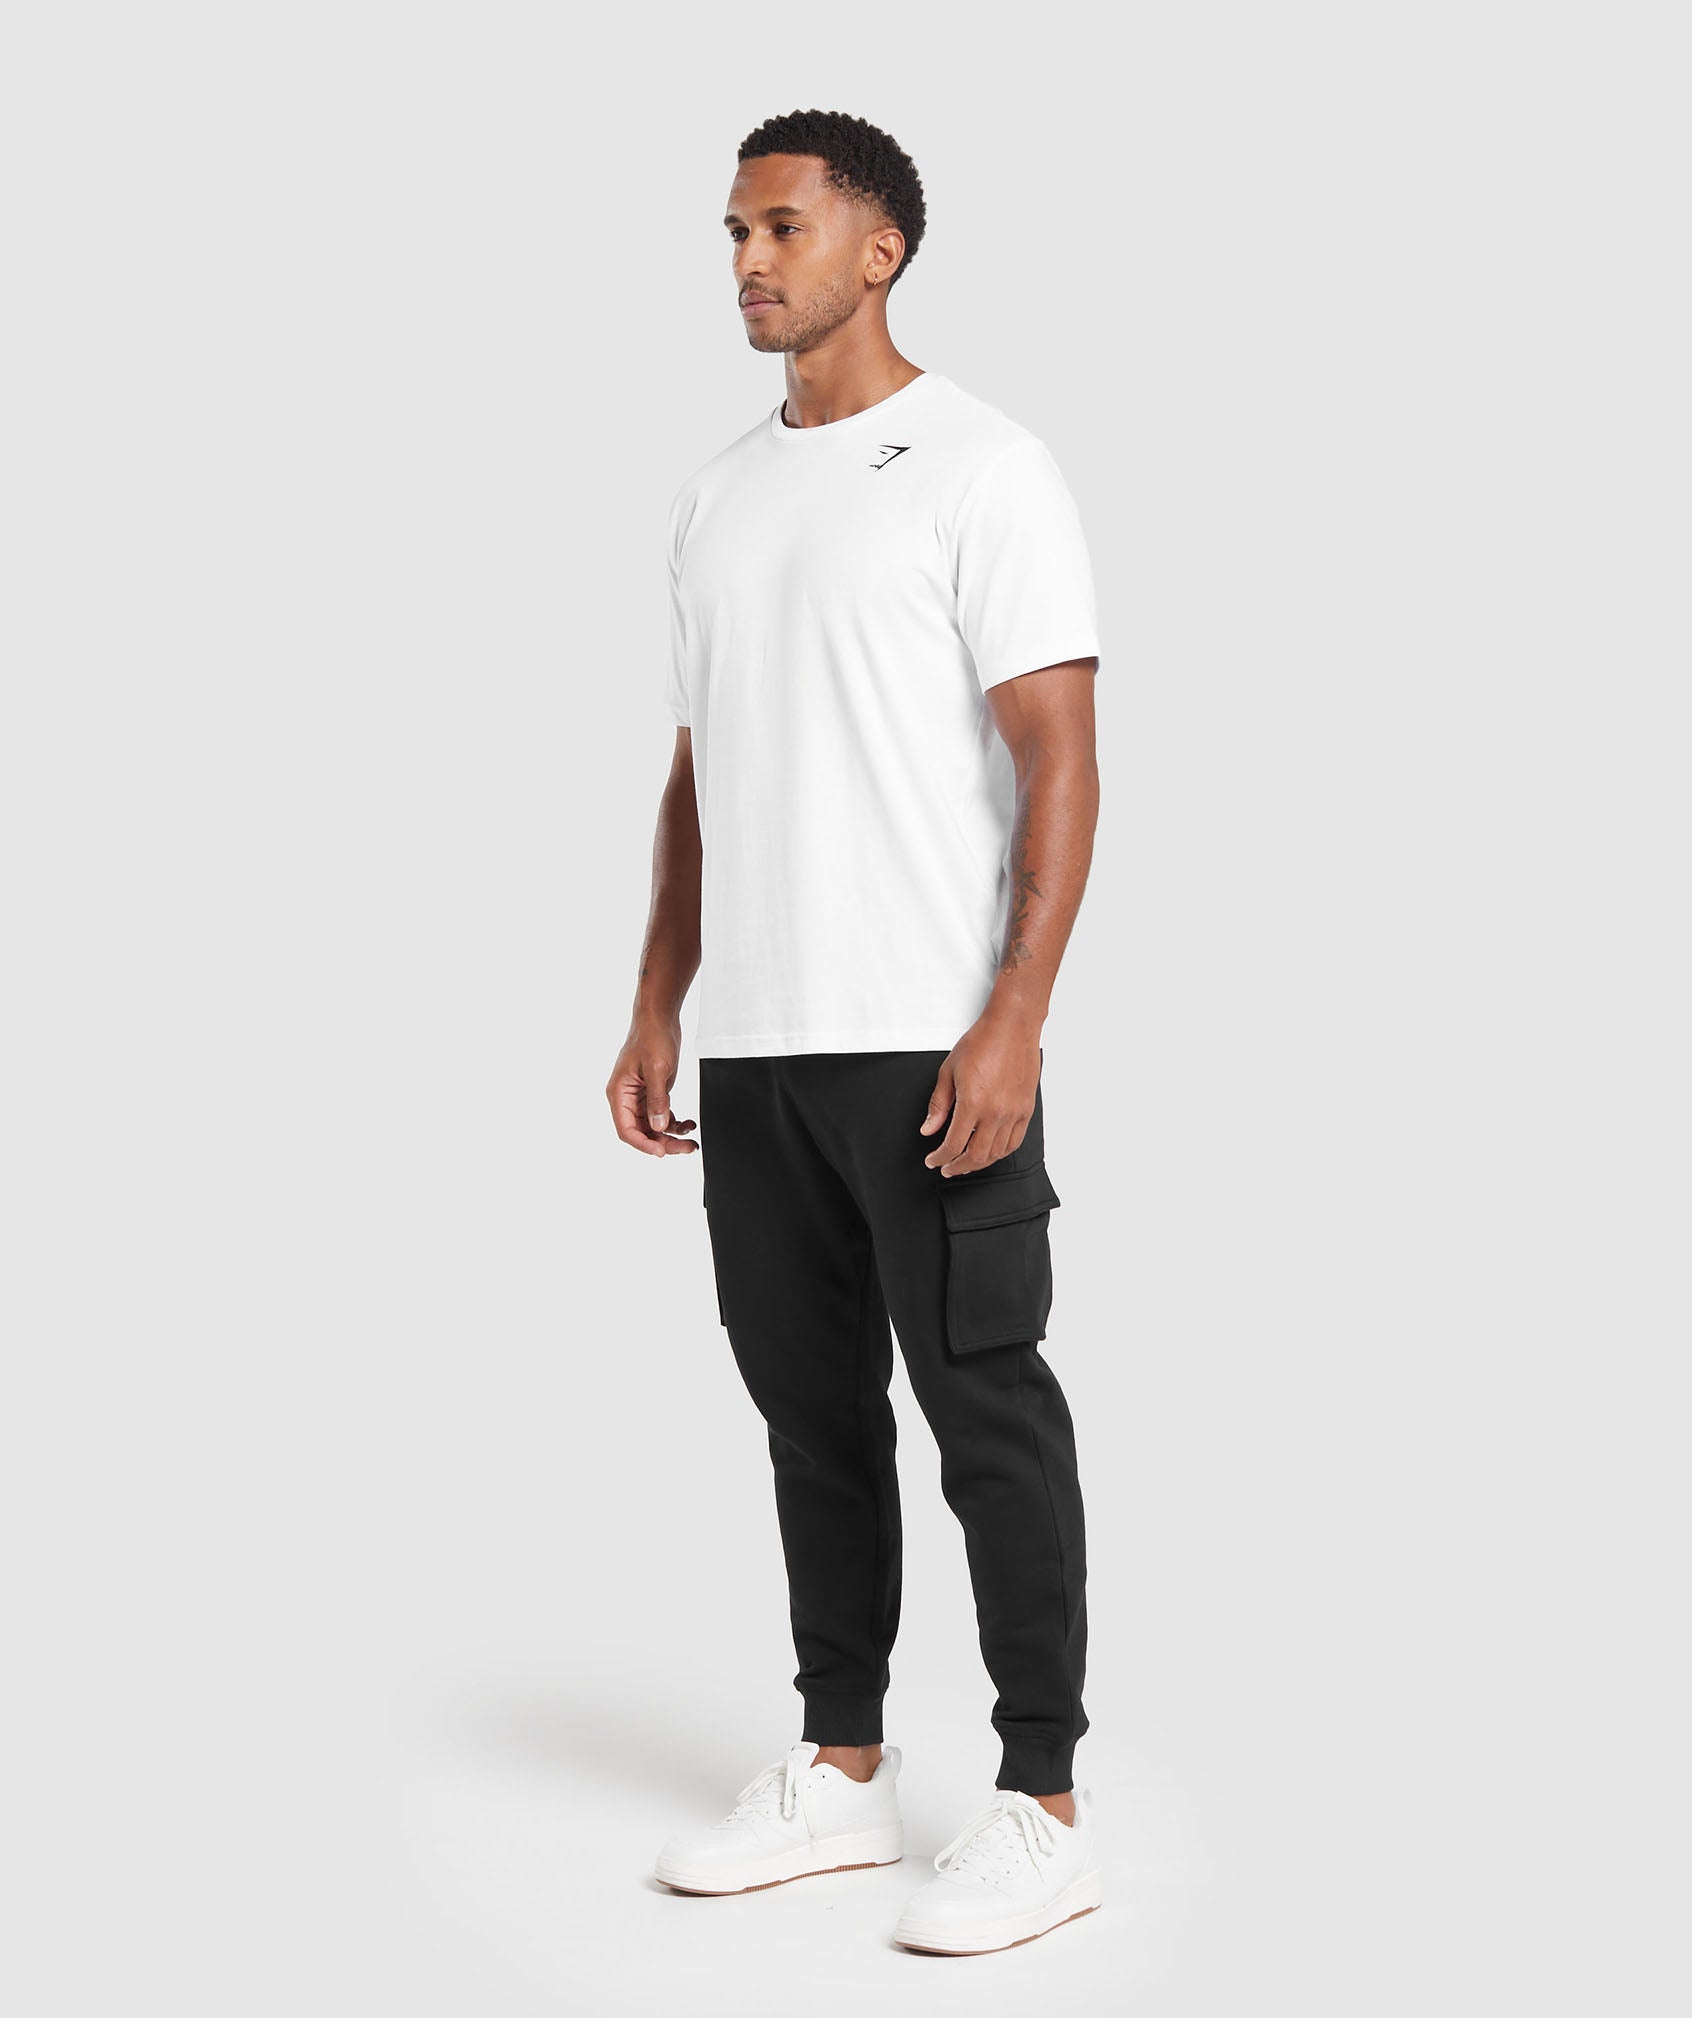 Crest Cargo Joggers in Black - view 4